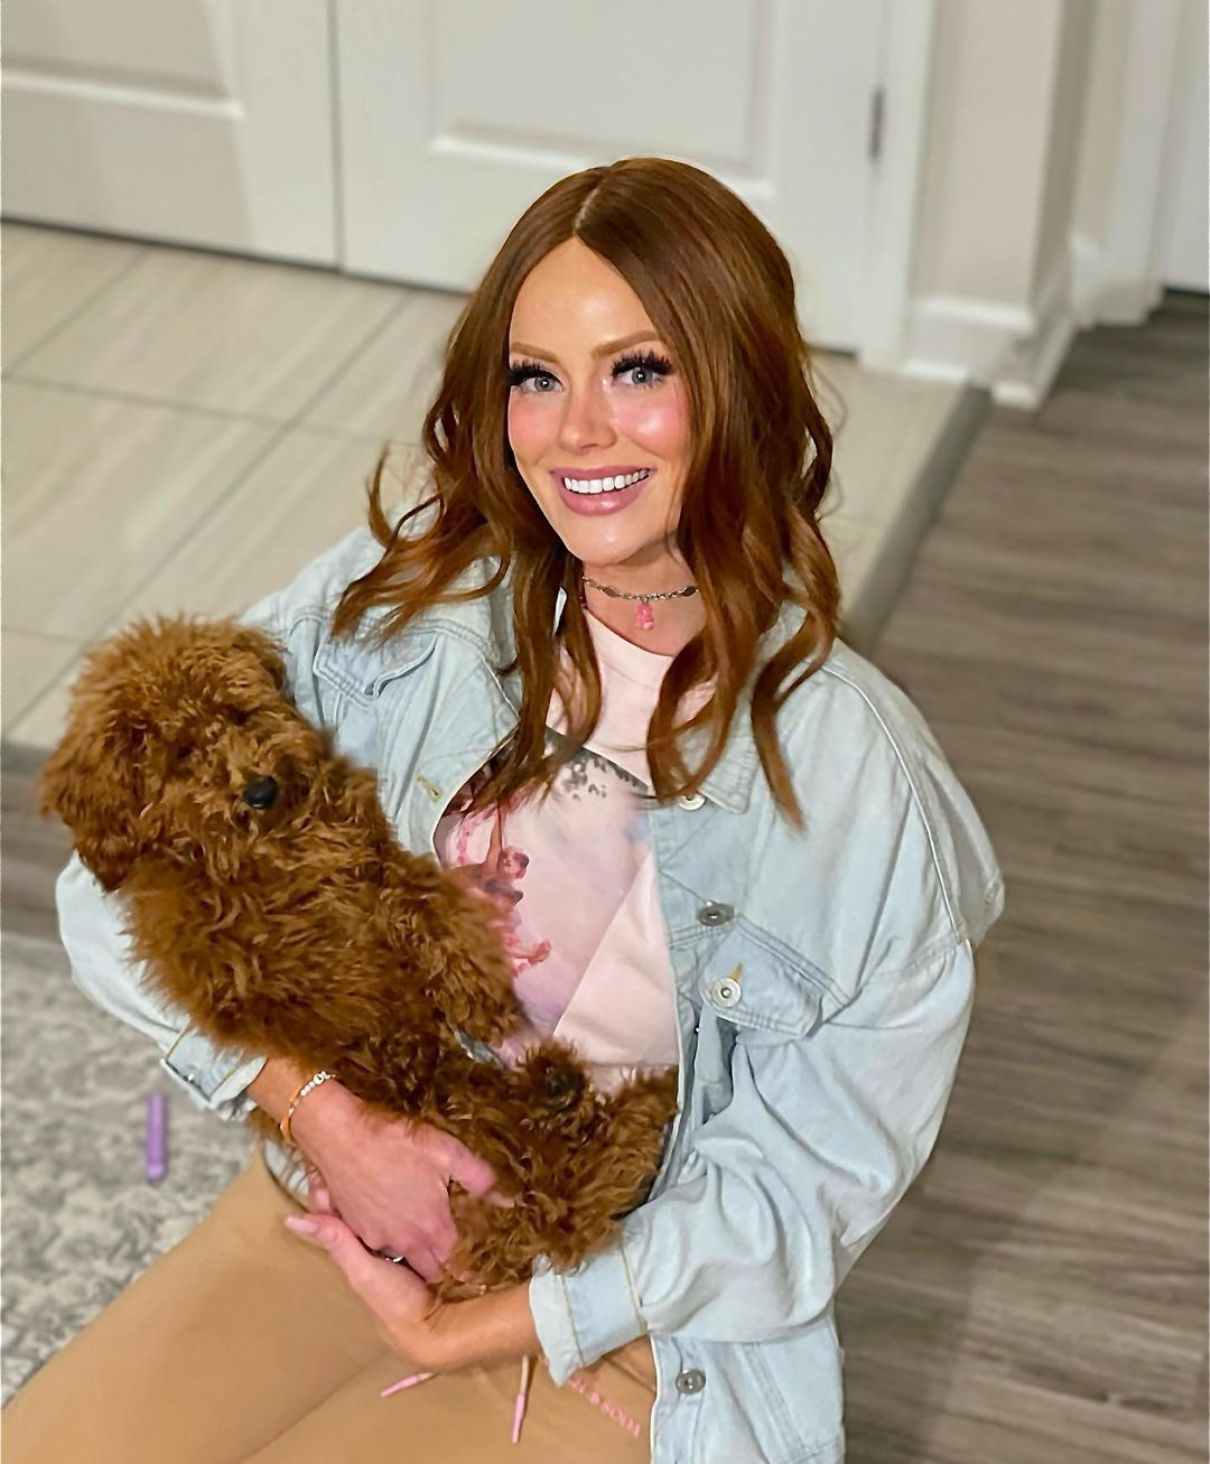 PHOTOS: Kathryn Dennis Accused of Getting Brazilian Butt Lift as Southern Charm Star Claims She "Popped Her Hip Out" For New Photo